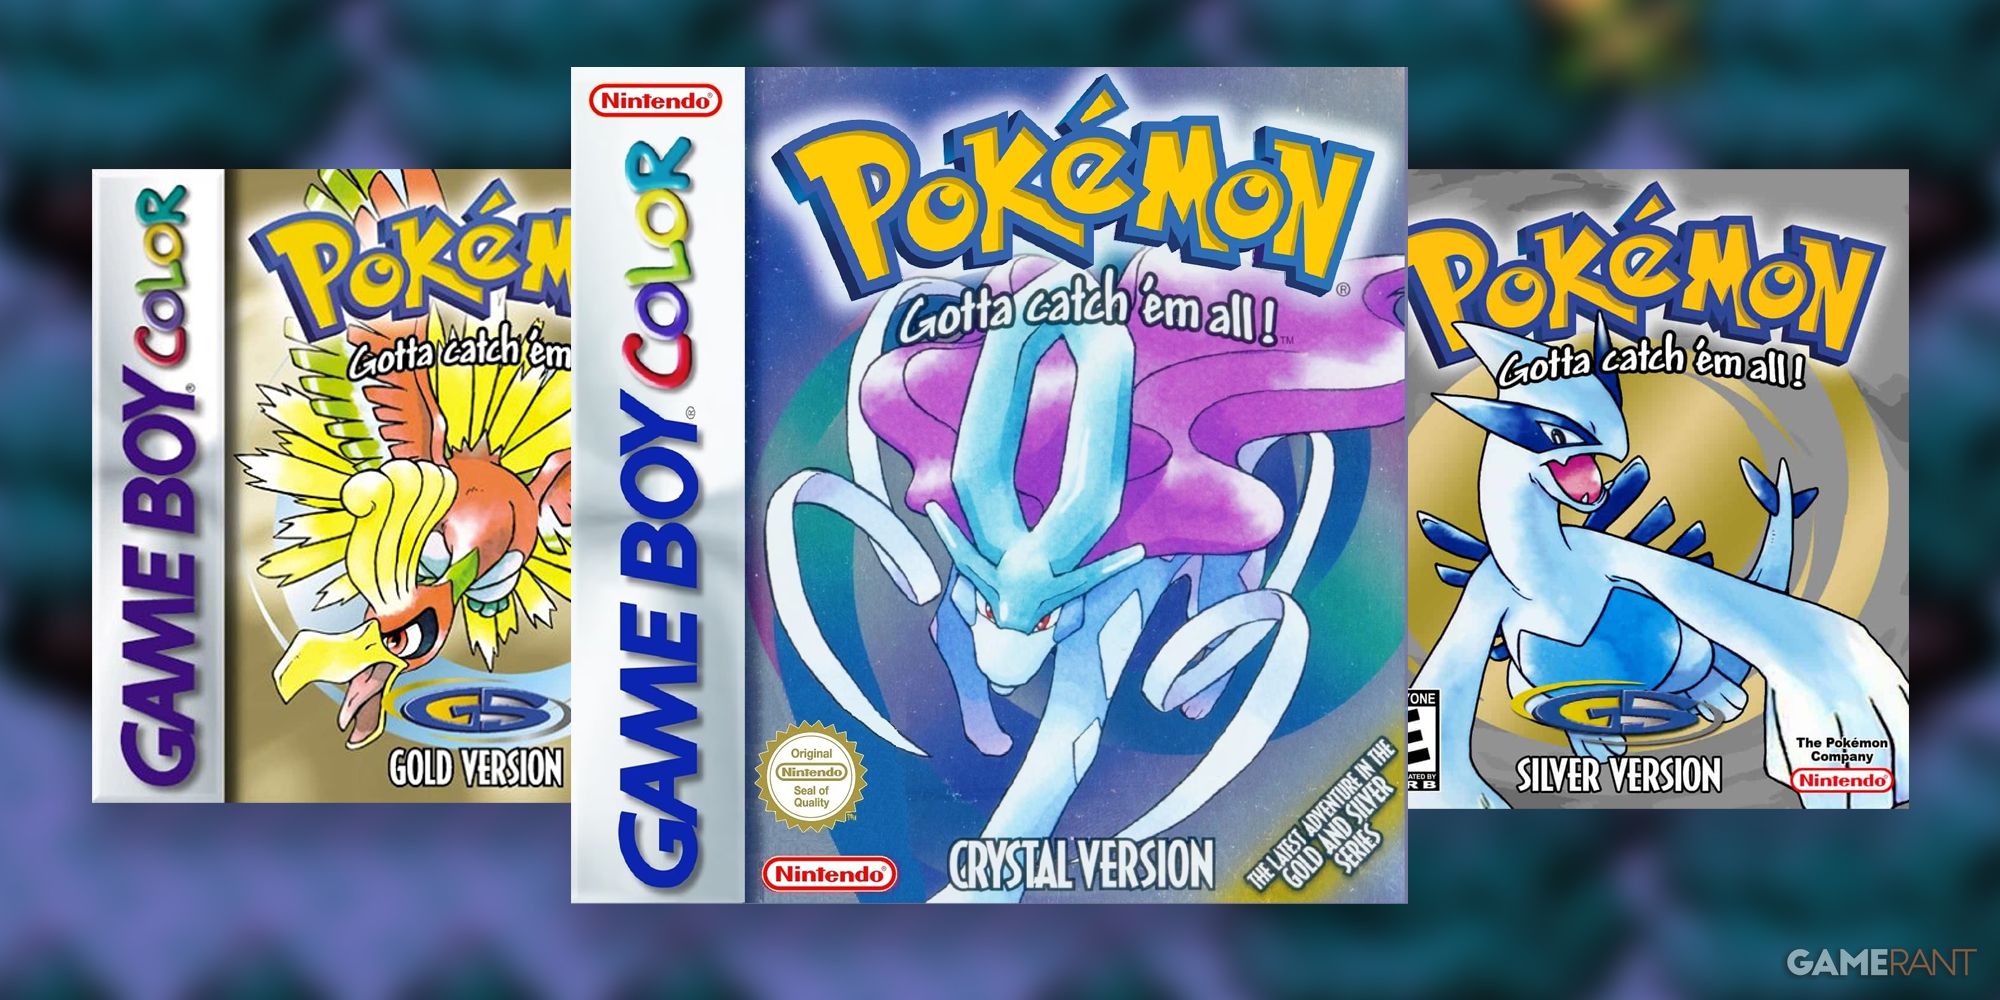 Pokemon Gold, Crystal, and Silver